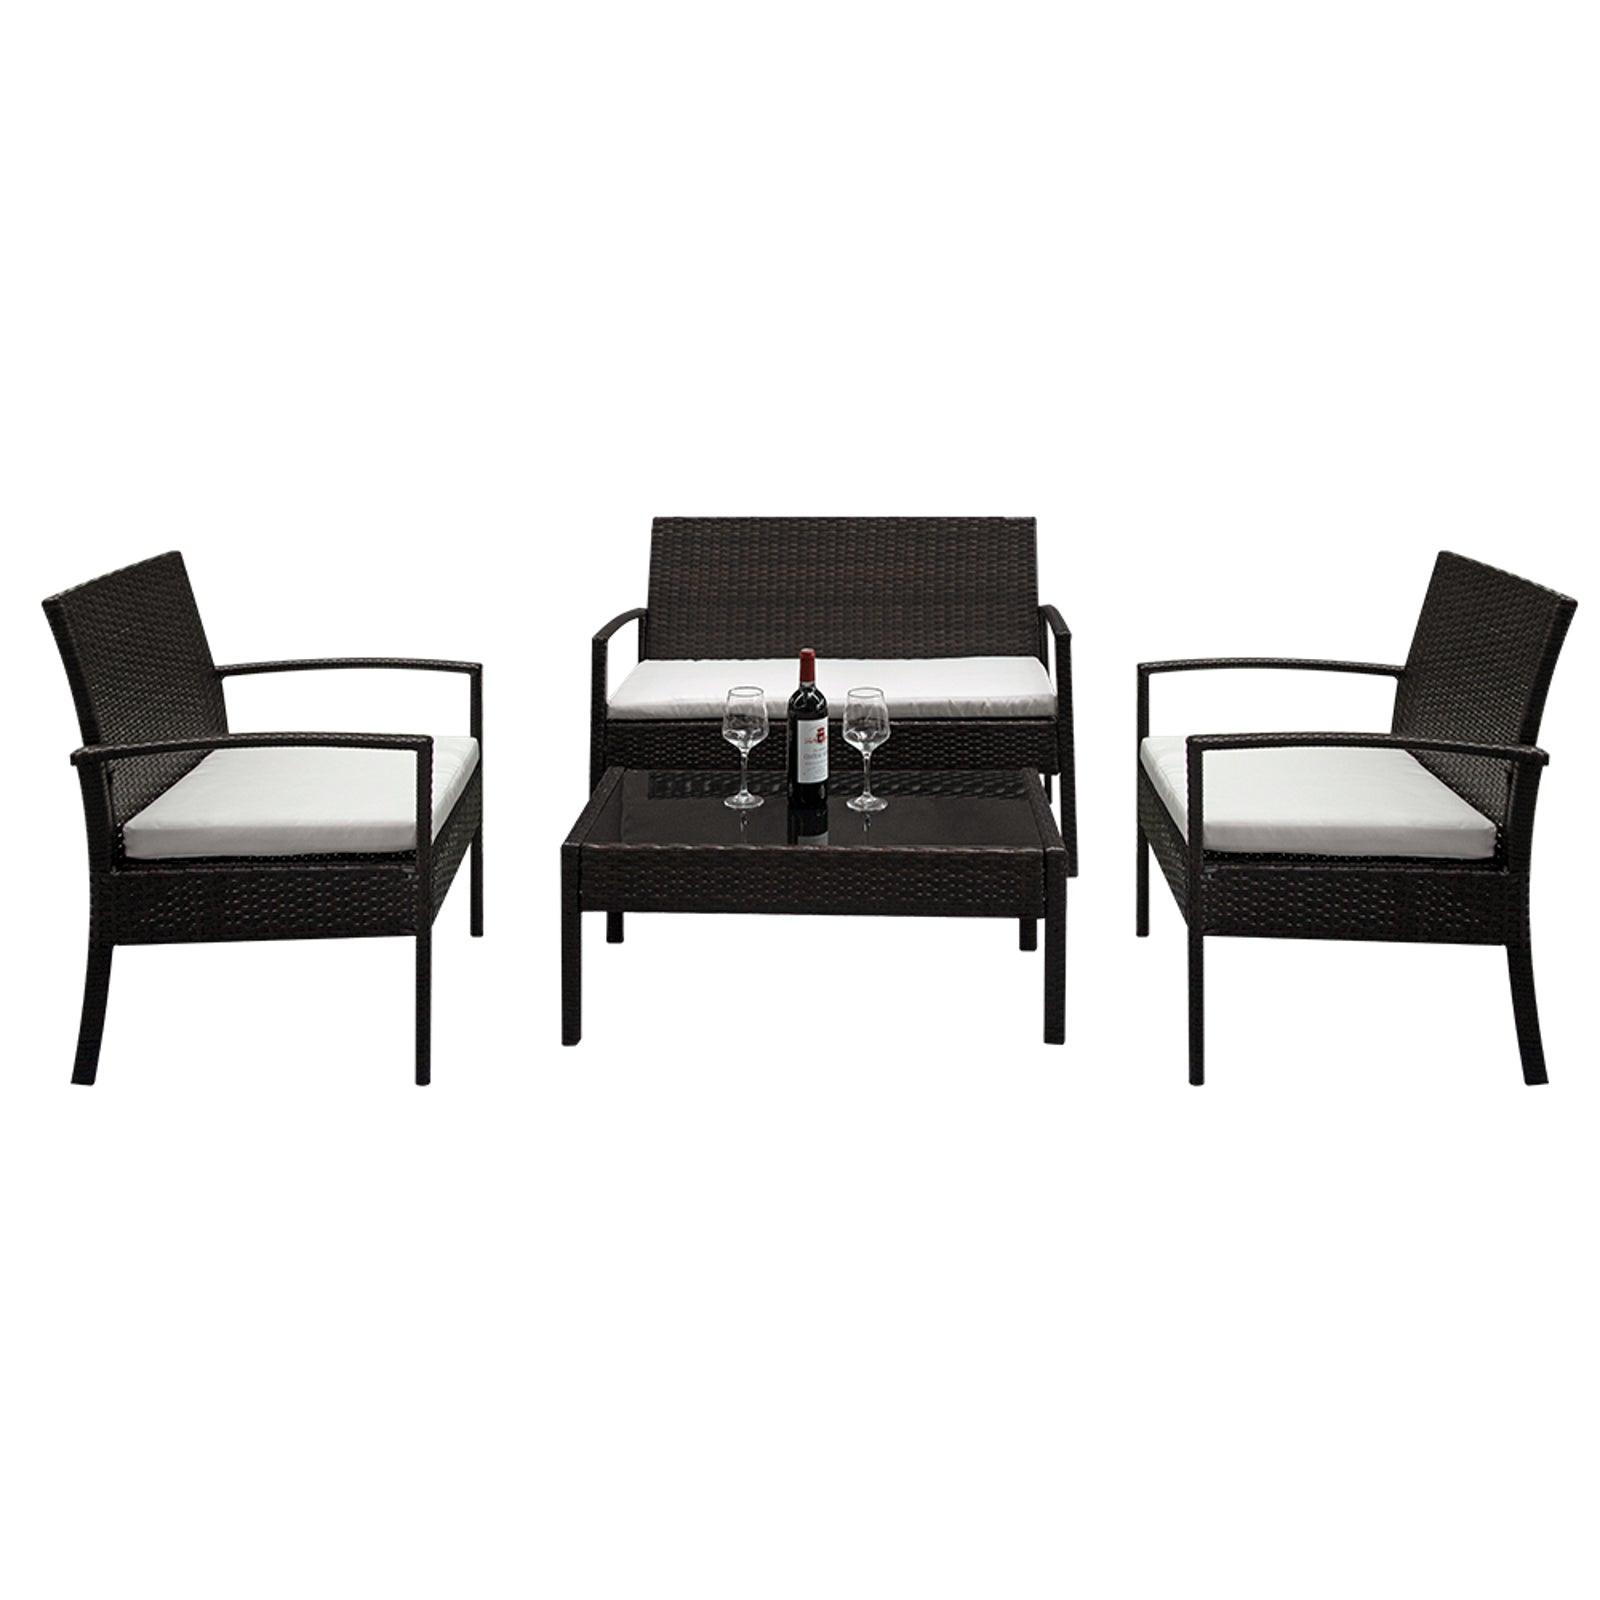 Garden Patio Set - Brown Gradient - PE Rattan - 2pcs Arm Chairs 1pc Love Seat & Tempered Glass Coffee Table - Charming Spaces